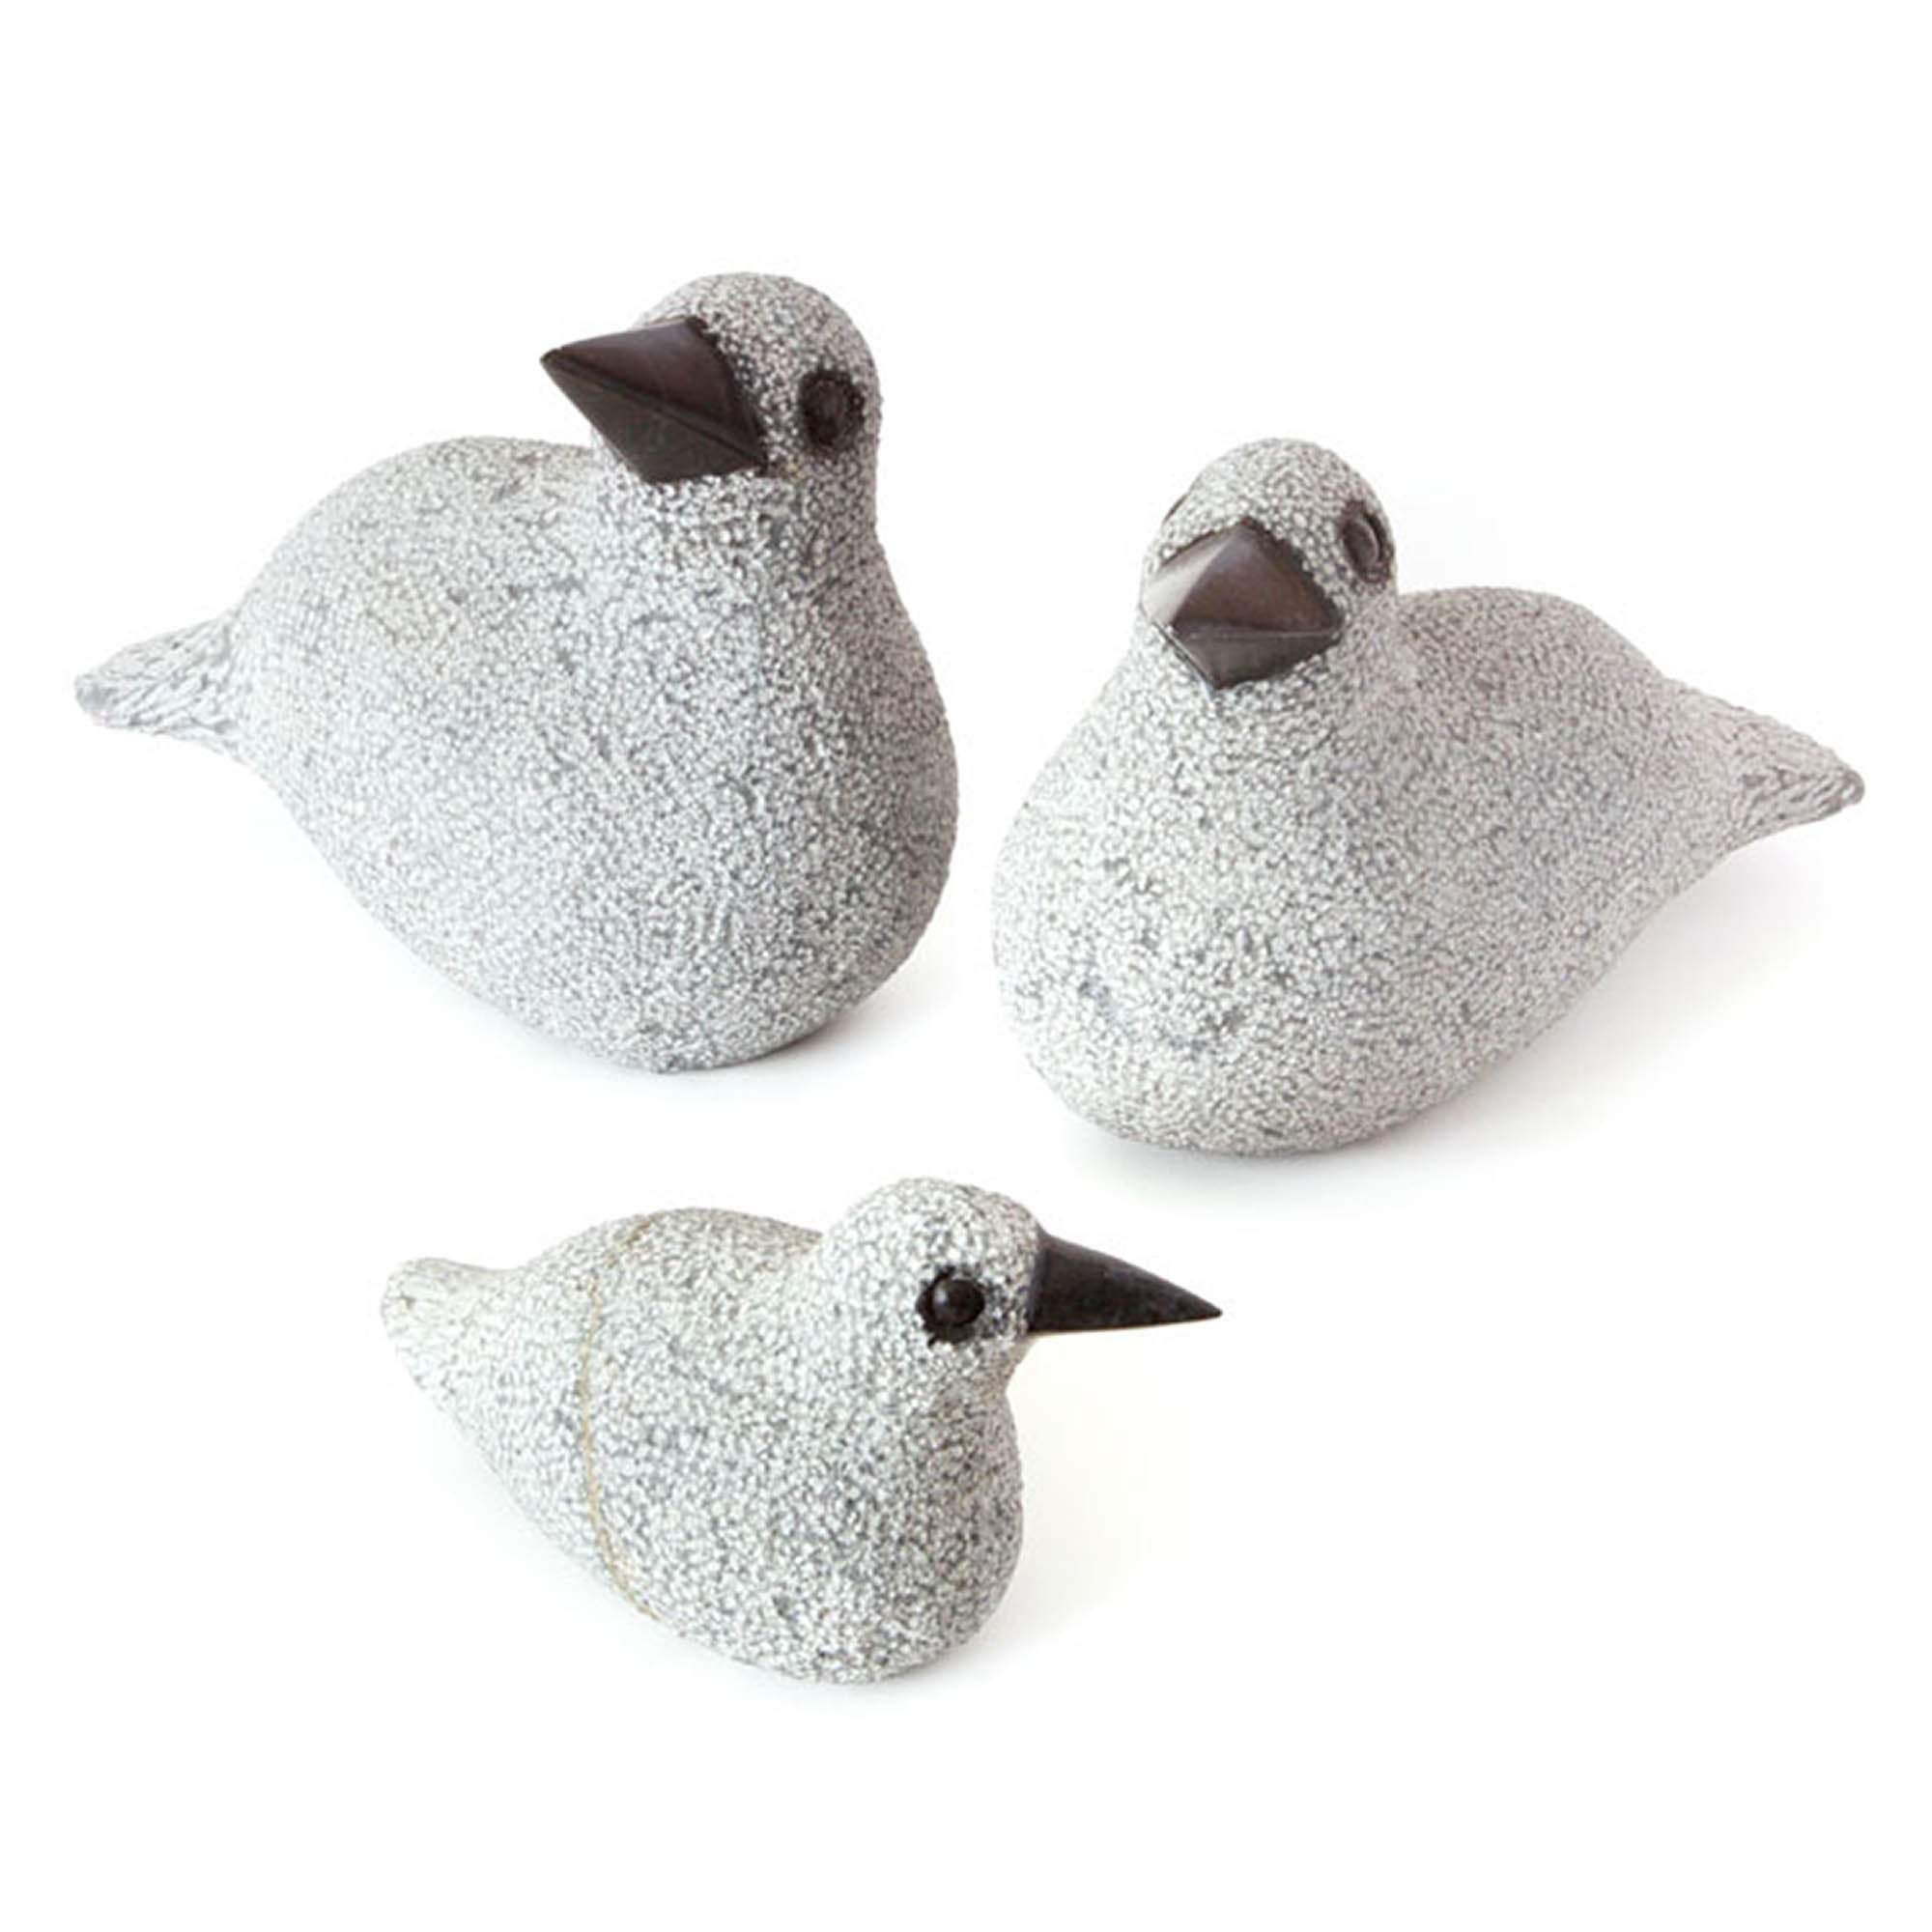 Hand-Carved Stone Duck Sculpture - M